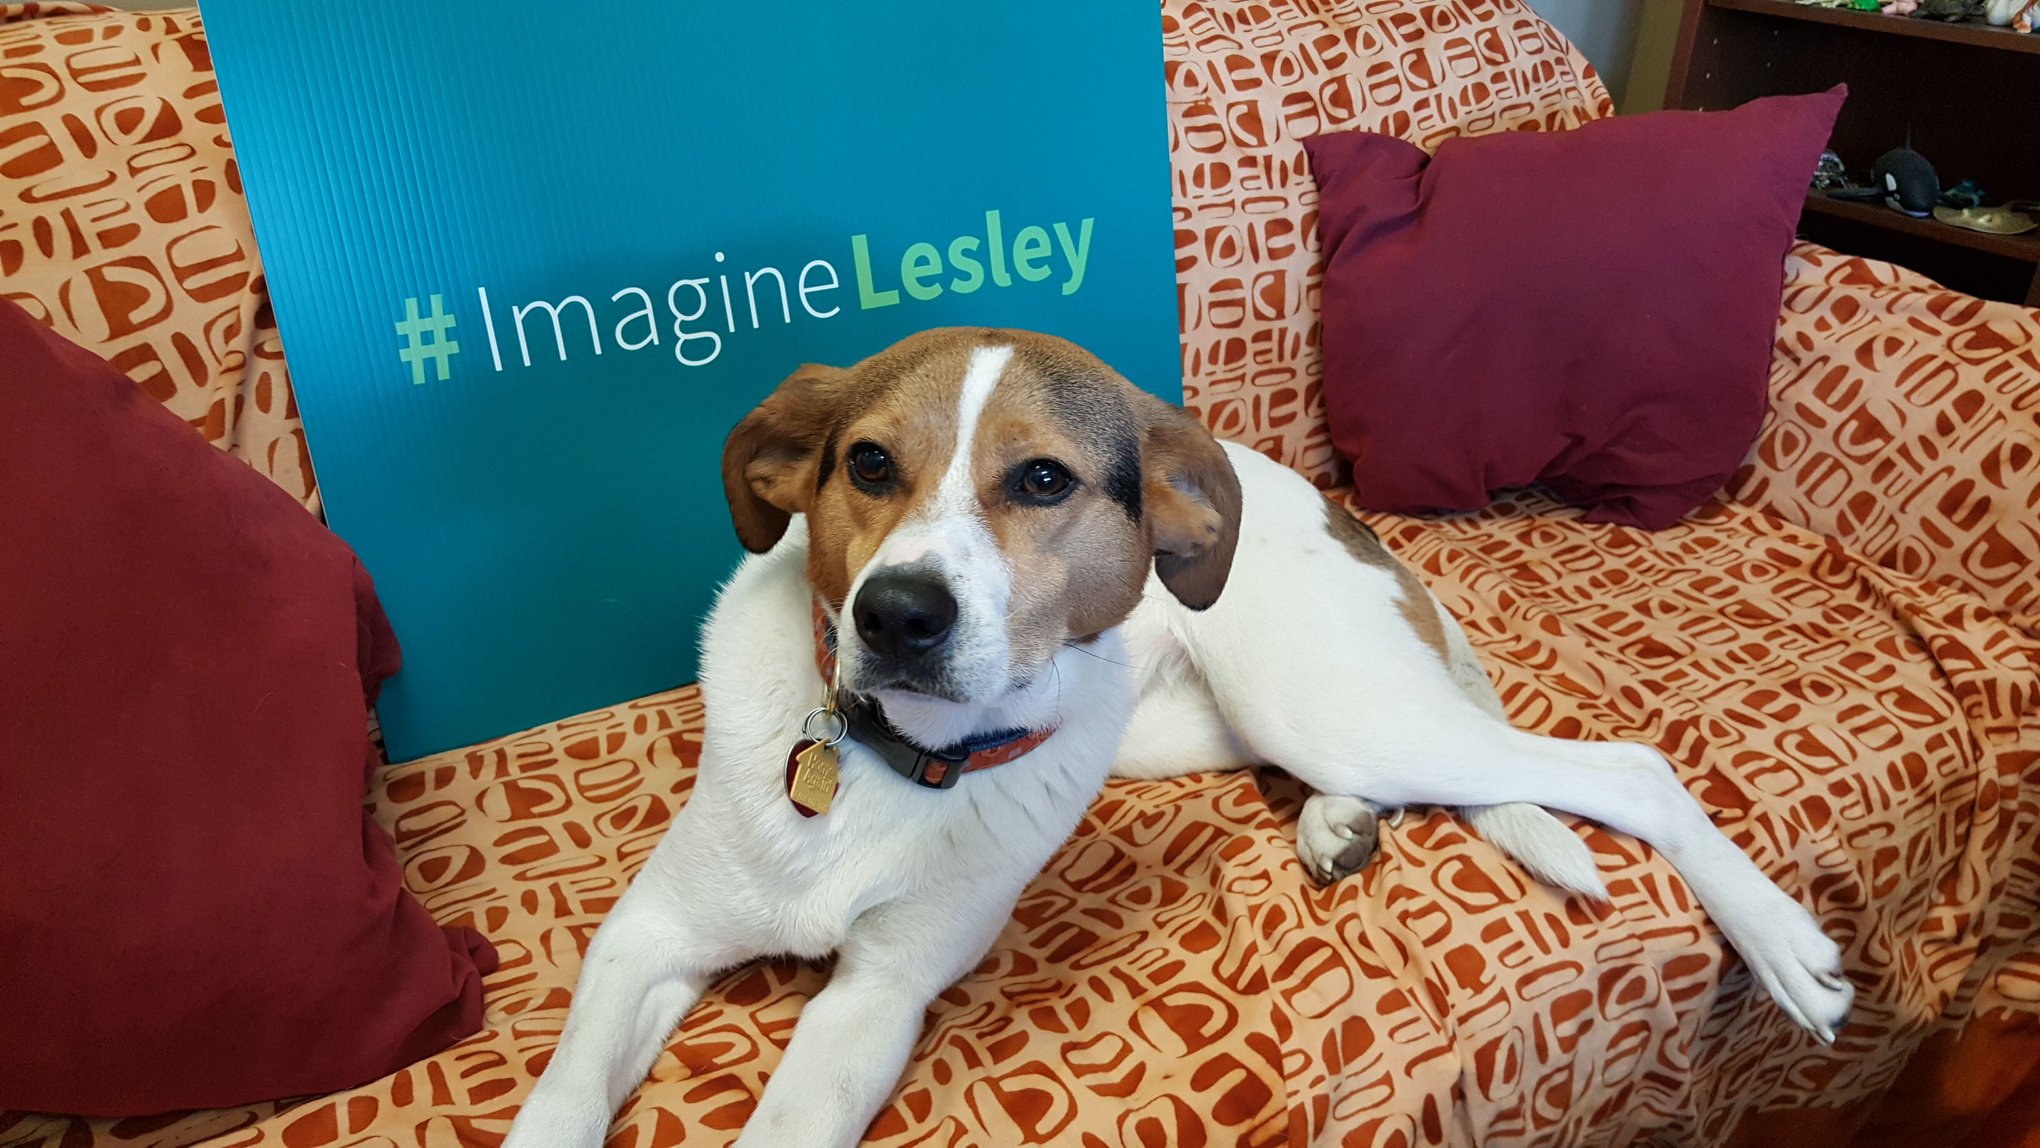 Tally lounges in front of the #ImagineLesley sign